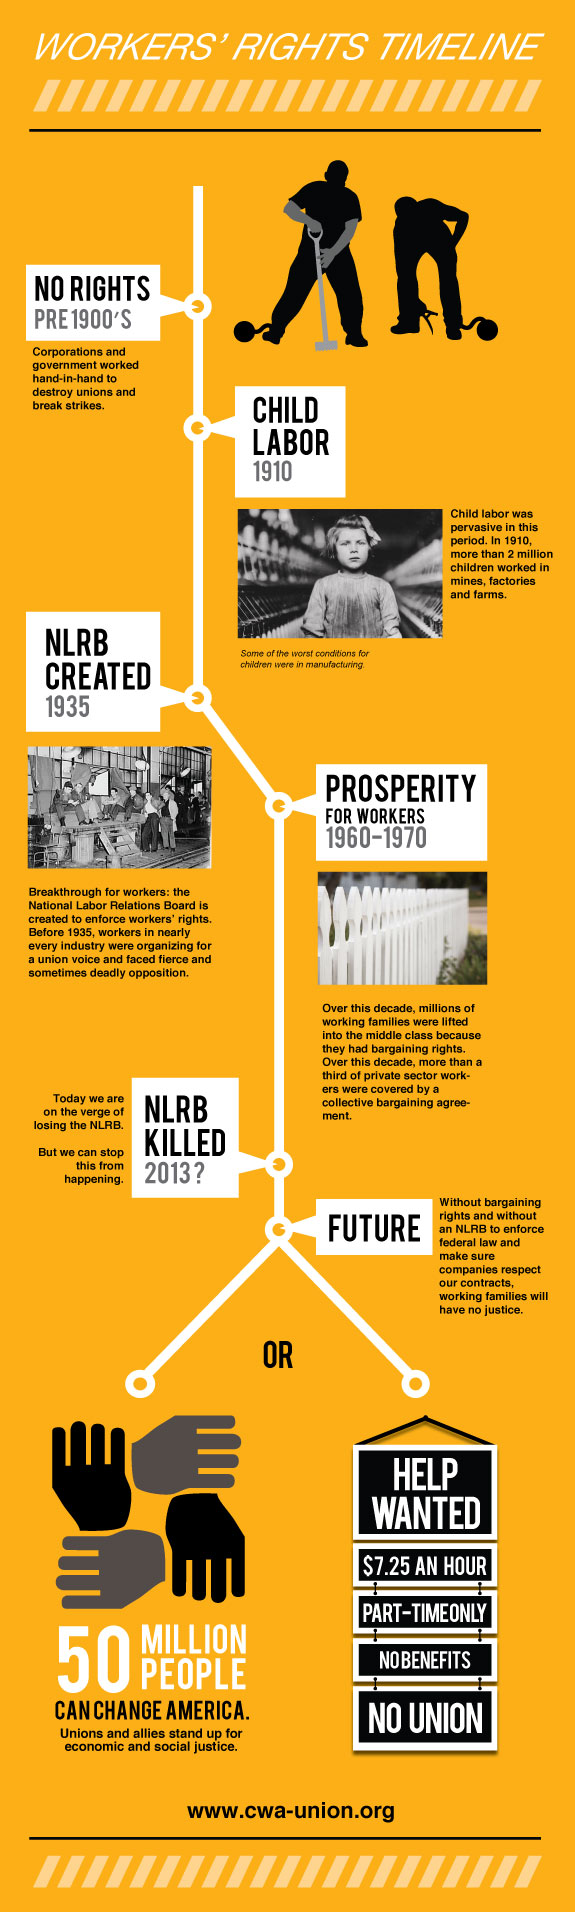 Workers' Rights Timeline